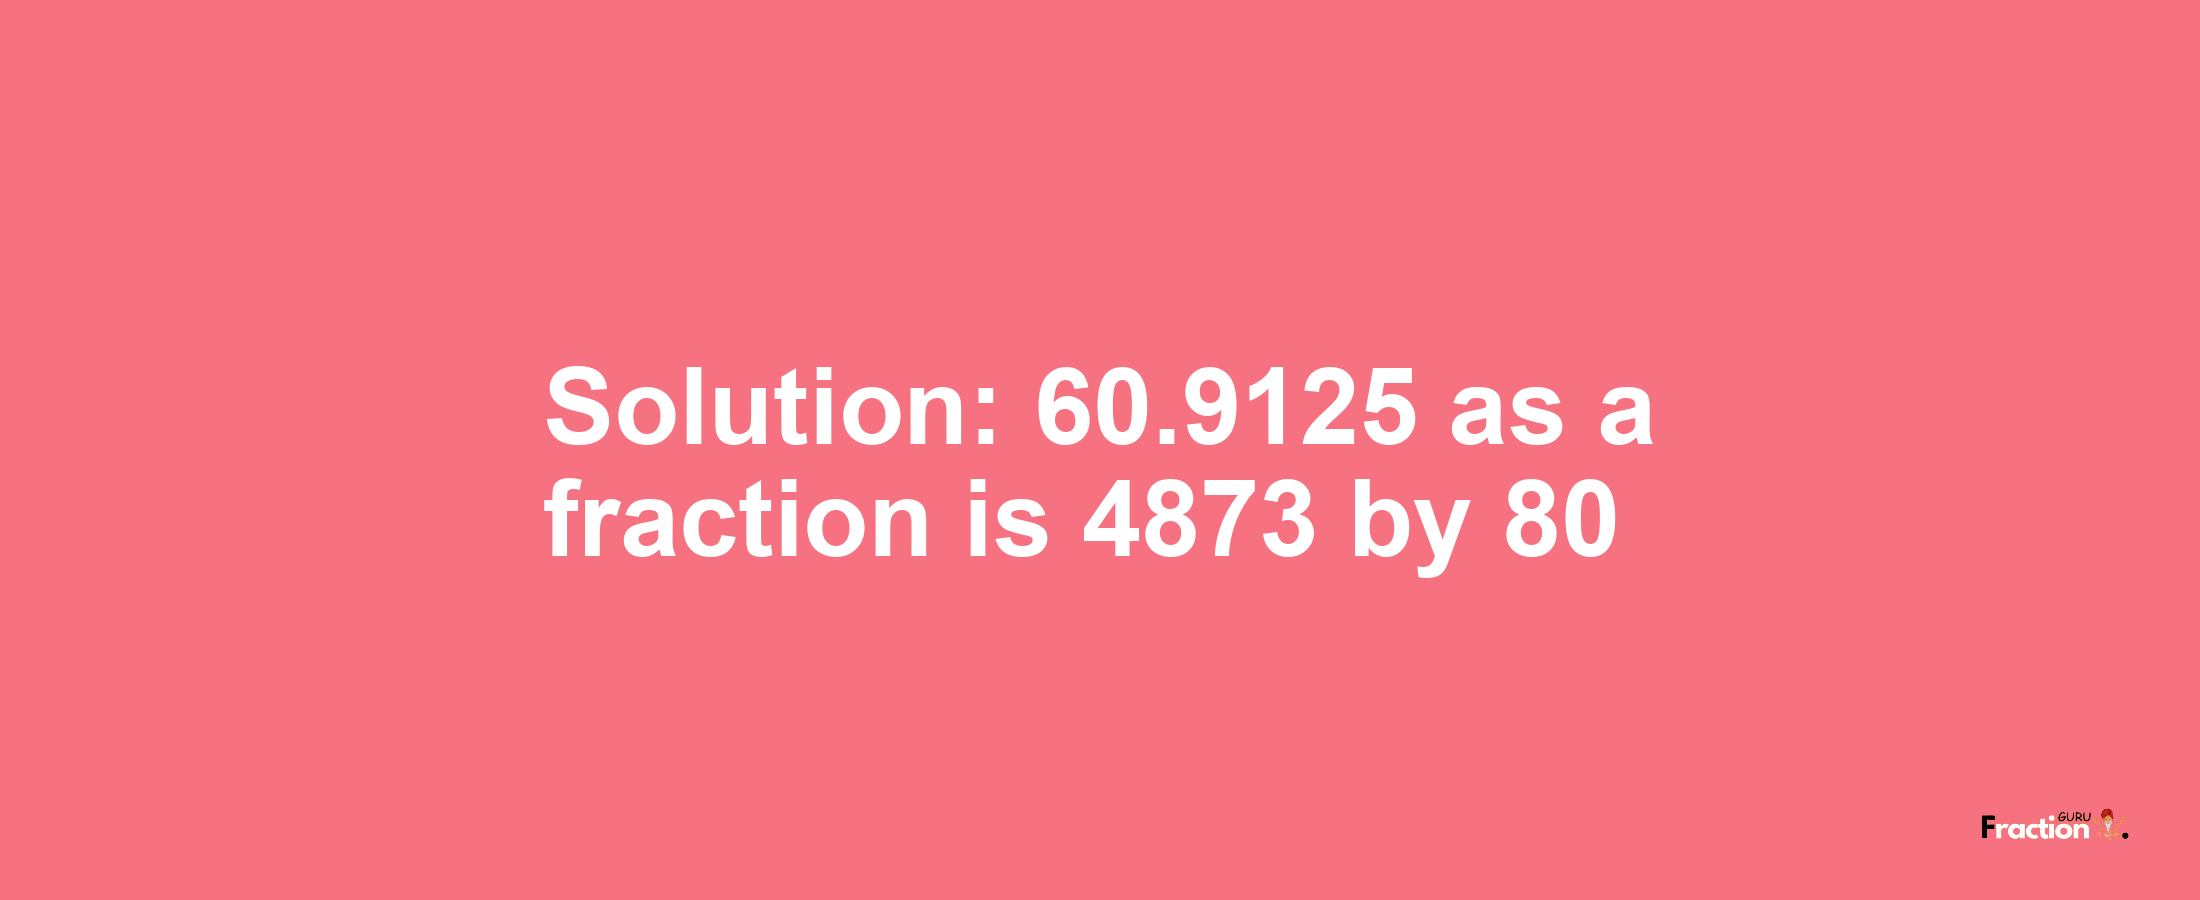 Solution:60.9125 as a fraction is 4873/80